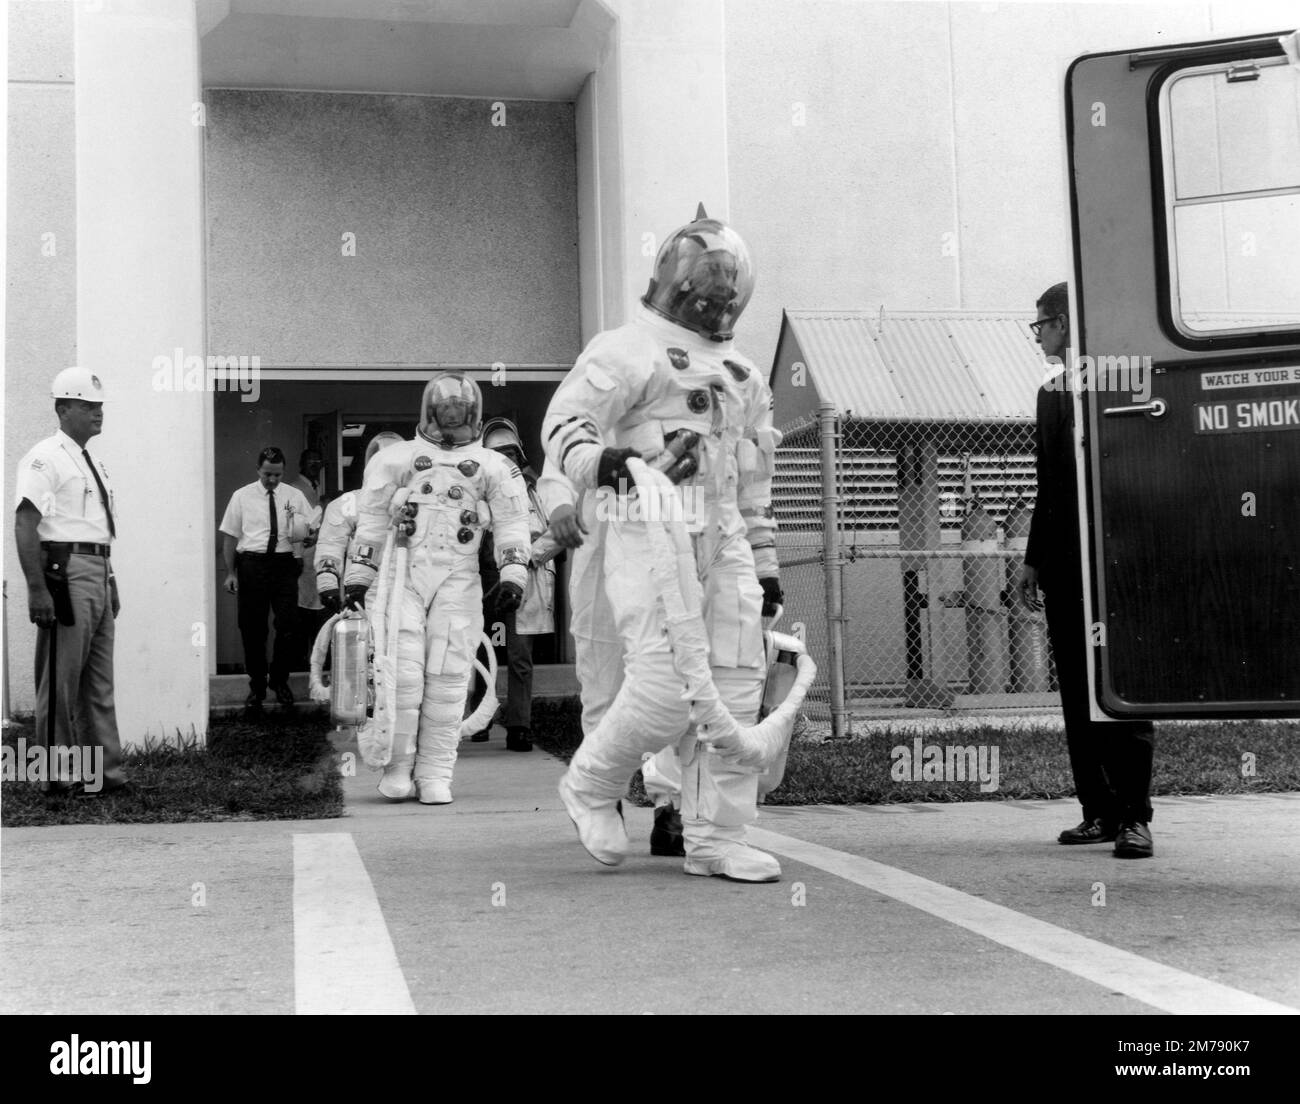 Cape Canaveral, United States. 11 October, 1968. NASA Apollo VII prime crew astronauts walk out of the Manned Spacecraft Operations Building on launch day at the Kennedy Space Center, October 11, 1968 in Cape Canaveral, Florida. Astronaut Walter Cunningham, center, died January 4, 2023 at 90-years-old, the last surviving member of the NASA Apollo 7 mission. Stock Photo